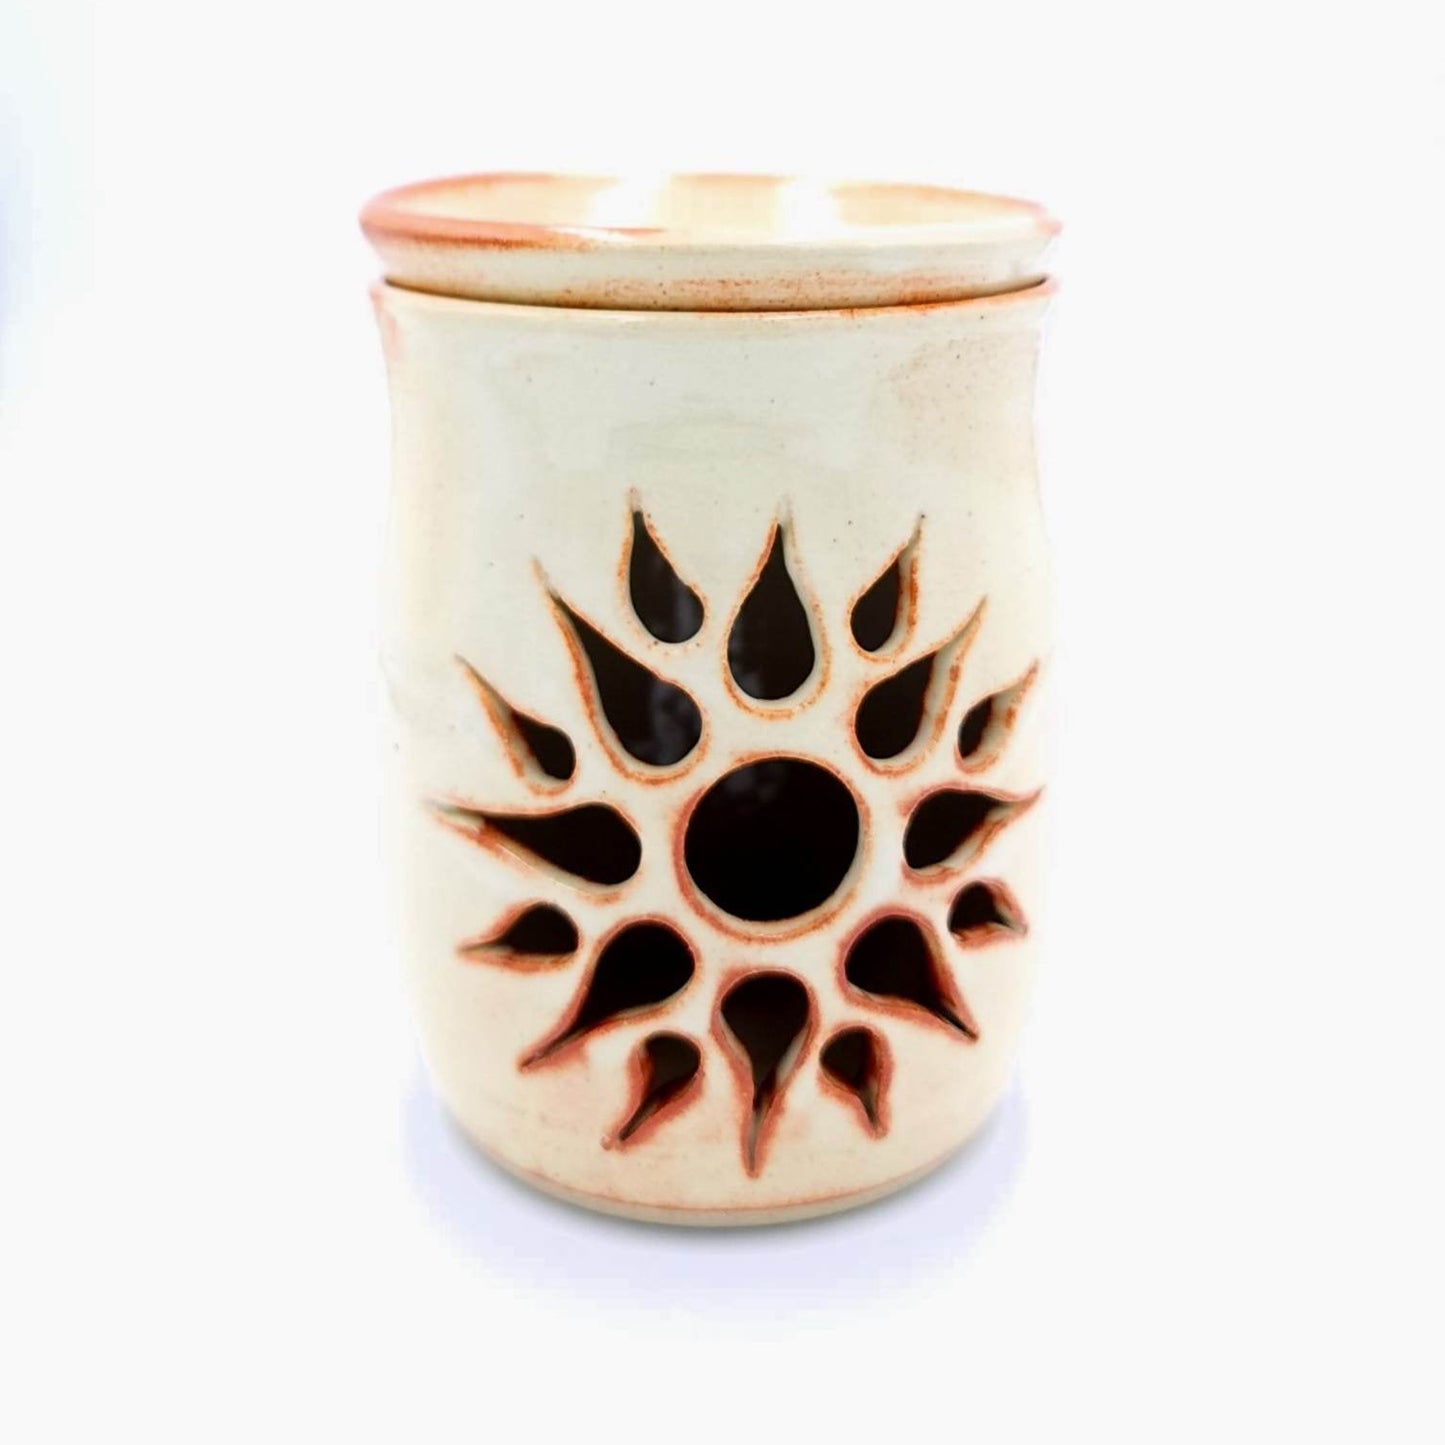 The wax melter features a beautiful hand-carved sunburst design that creates a warm and inviting atmosphere, while the rustic white glaze adds a touch of sophistication and elegance. Approximate dimensions:  12cm x 9cm  * two tea light candles are included. Scented wax or oils not included.